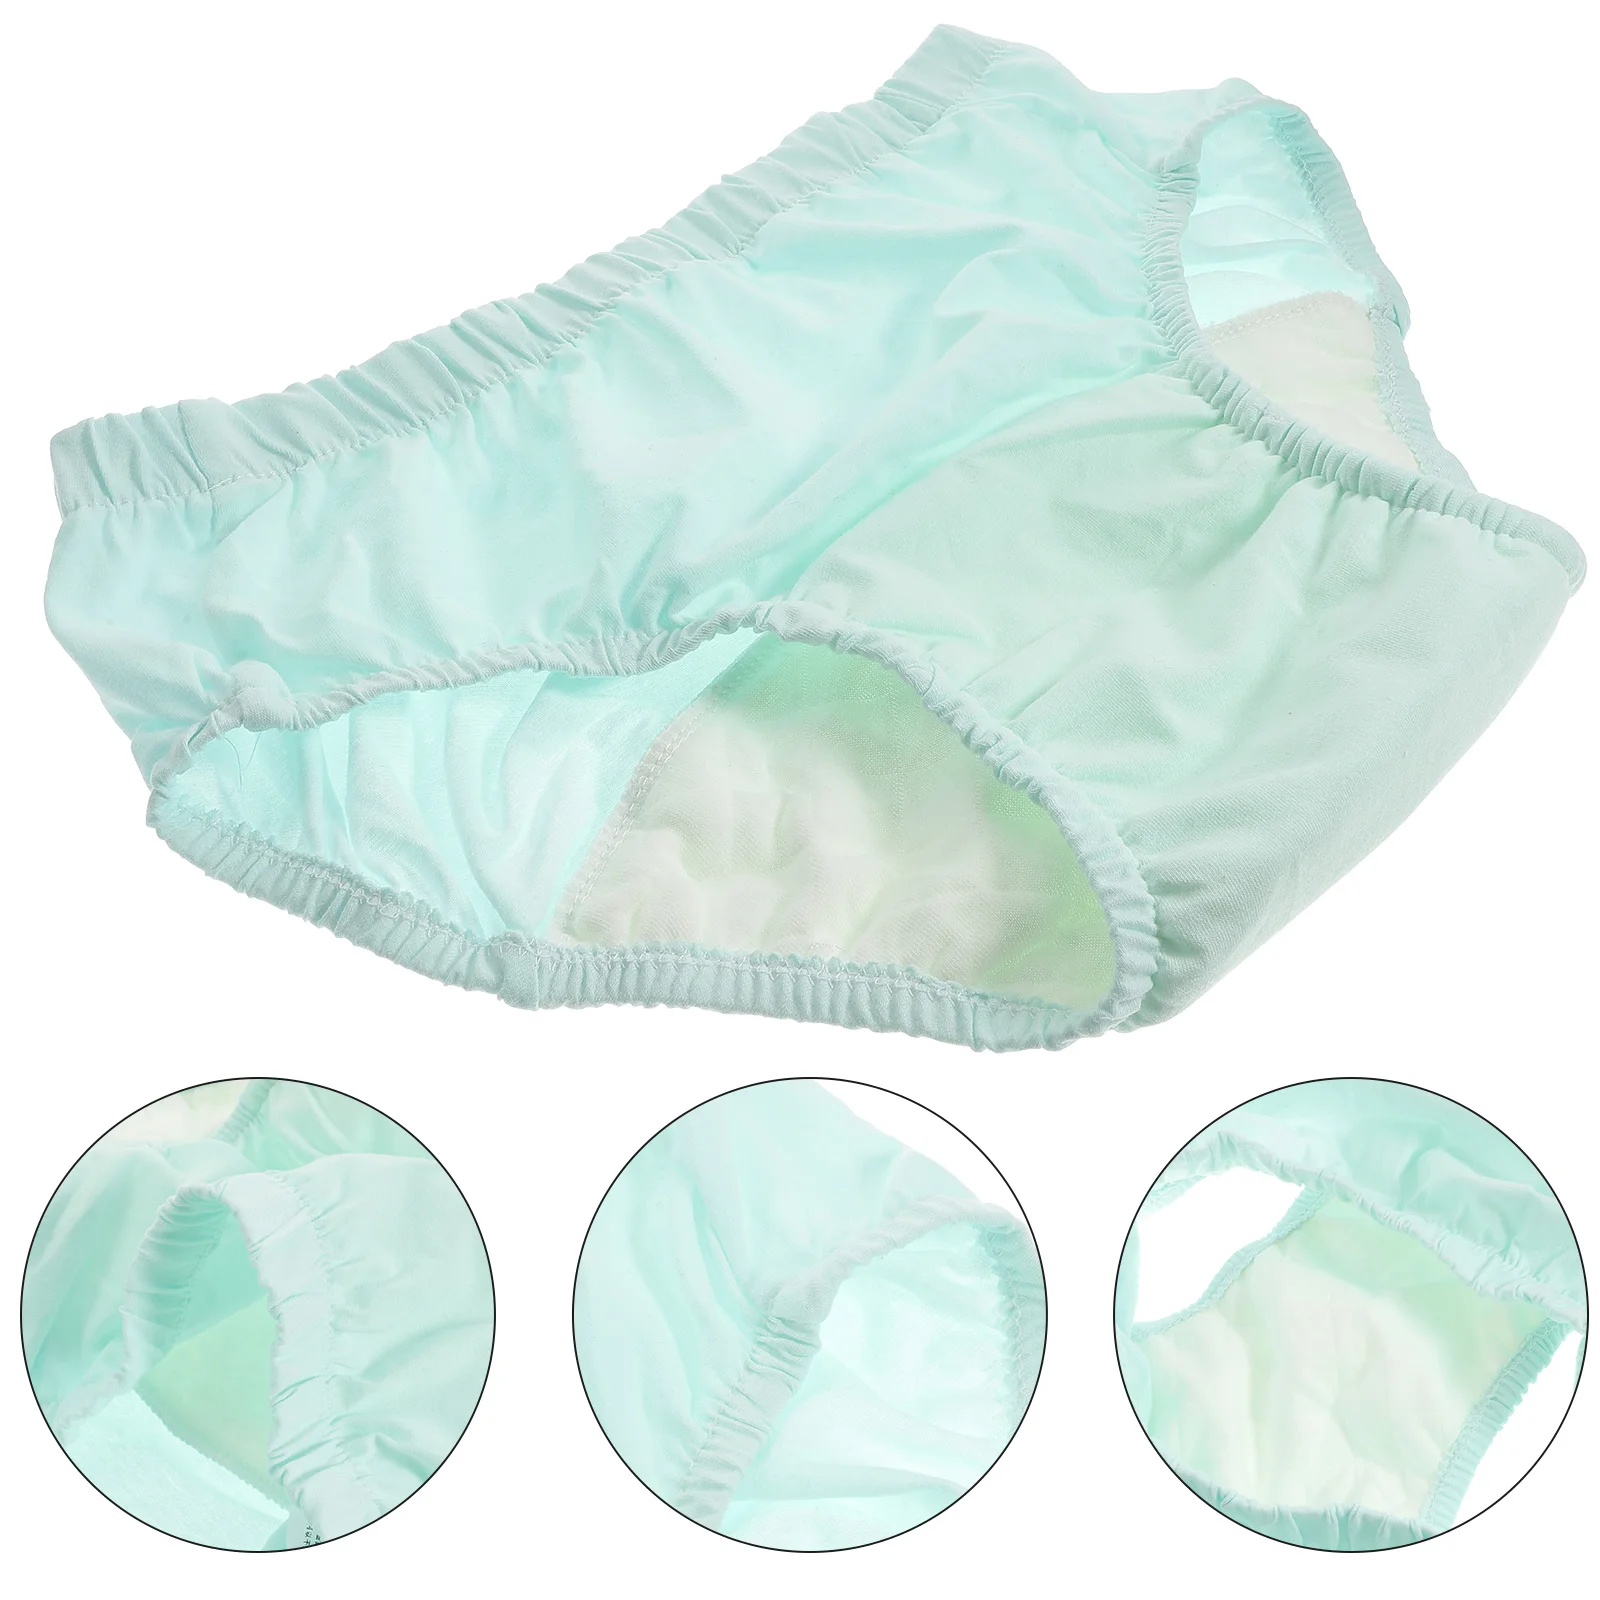 

Diaper Adult Incontinence Diapers Elderly Nappy Pants Reusable Cloth Washable Old Man Briefs Disabled Adults Urinary Nappies